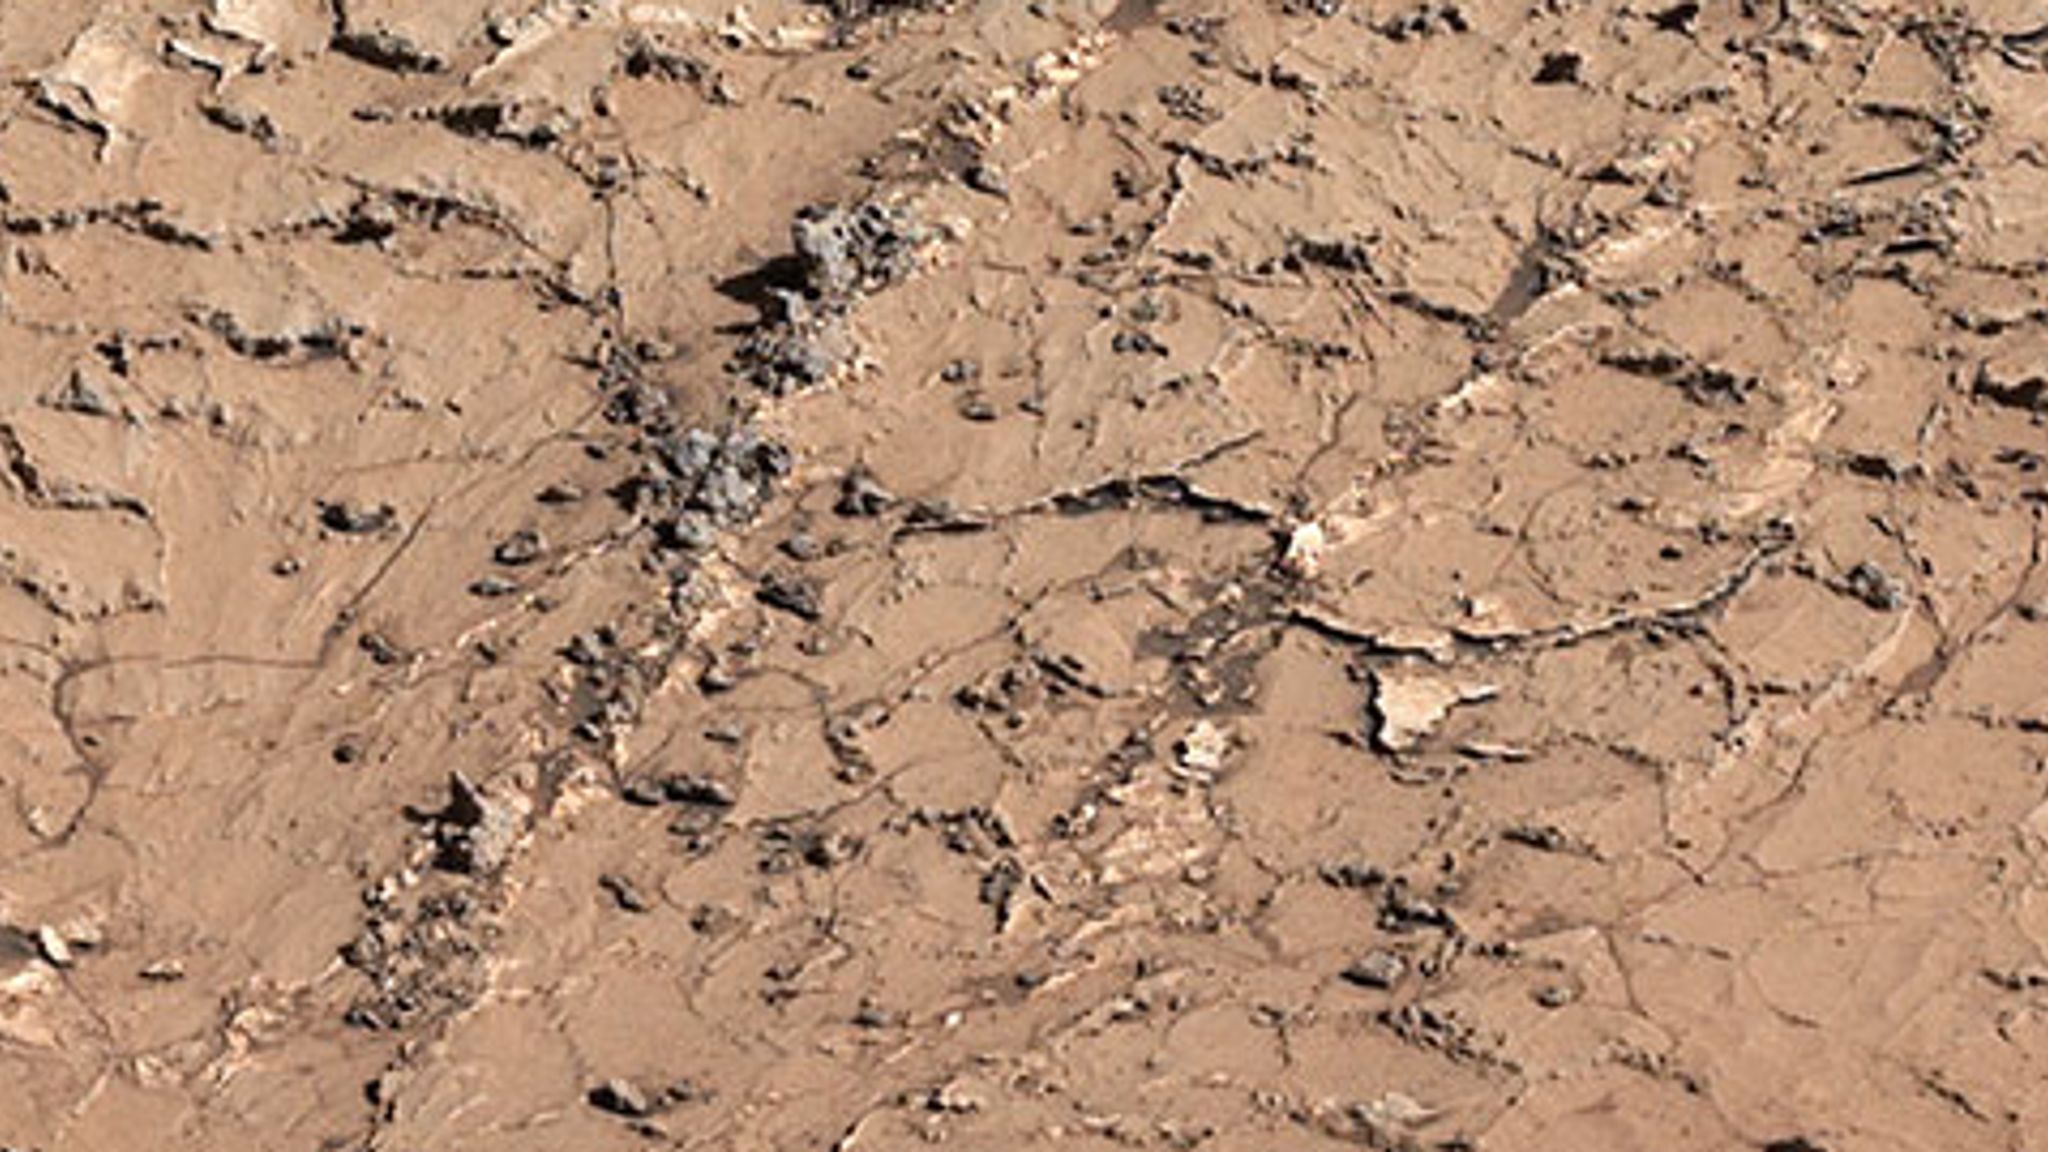 NASA's Mars rover finds surprising mud cracks that hint planet once supported life